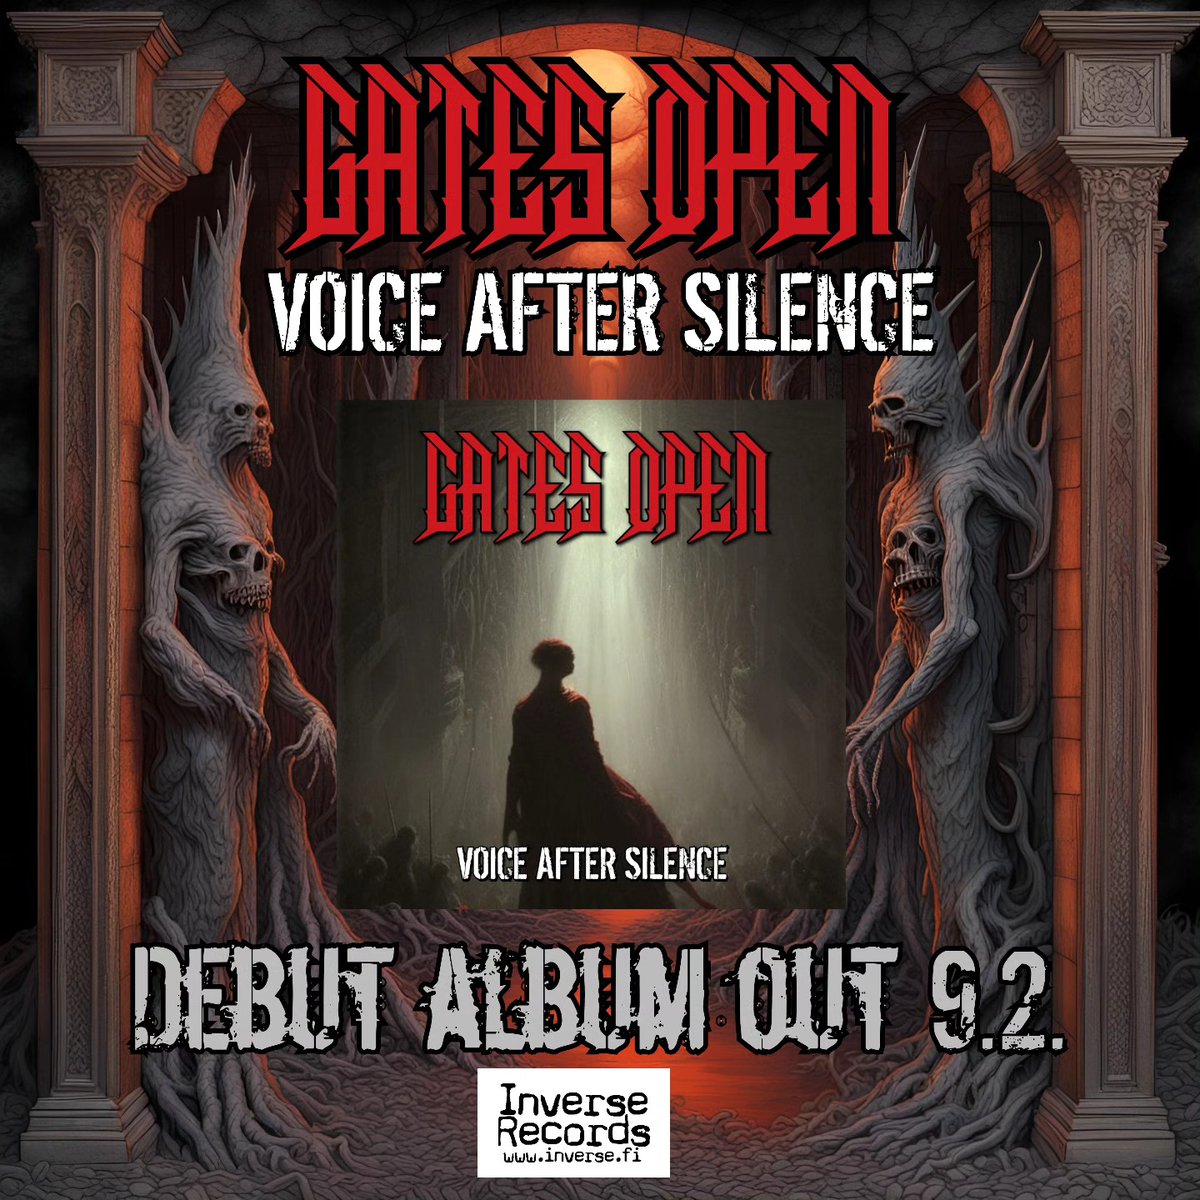 GATES OPEN are set to release their debut album, VOICE AFTER SILENCE, on February 9th 2024 via Inverse Records. You can pre-order the album Digitally via their bandcamp page gatesopen.bandcamp.com/album/voice-af… #metalrager666 #gatesopenband #voiceaftersilence